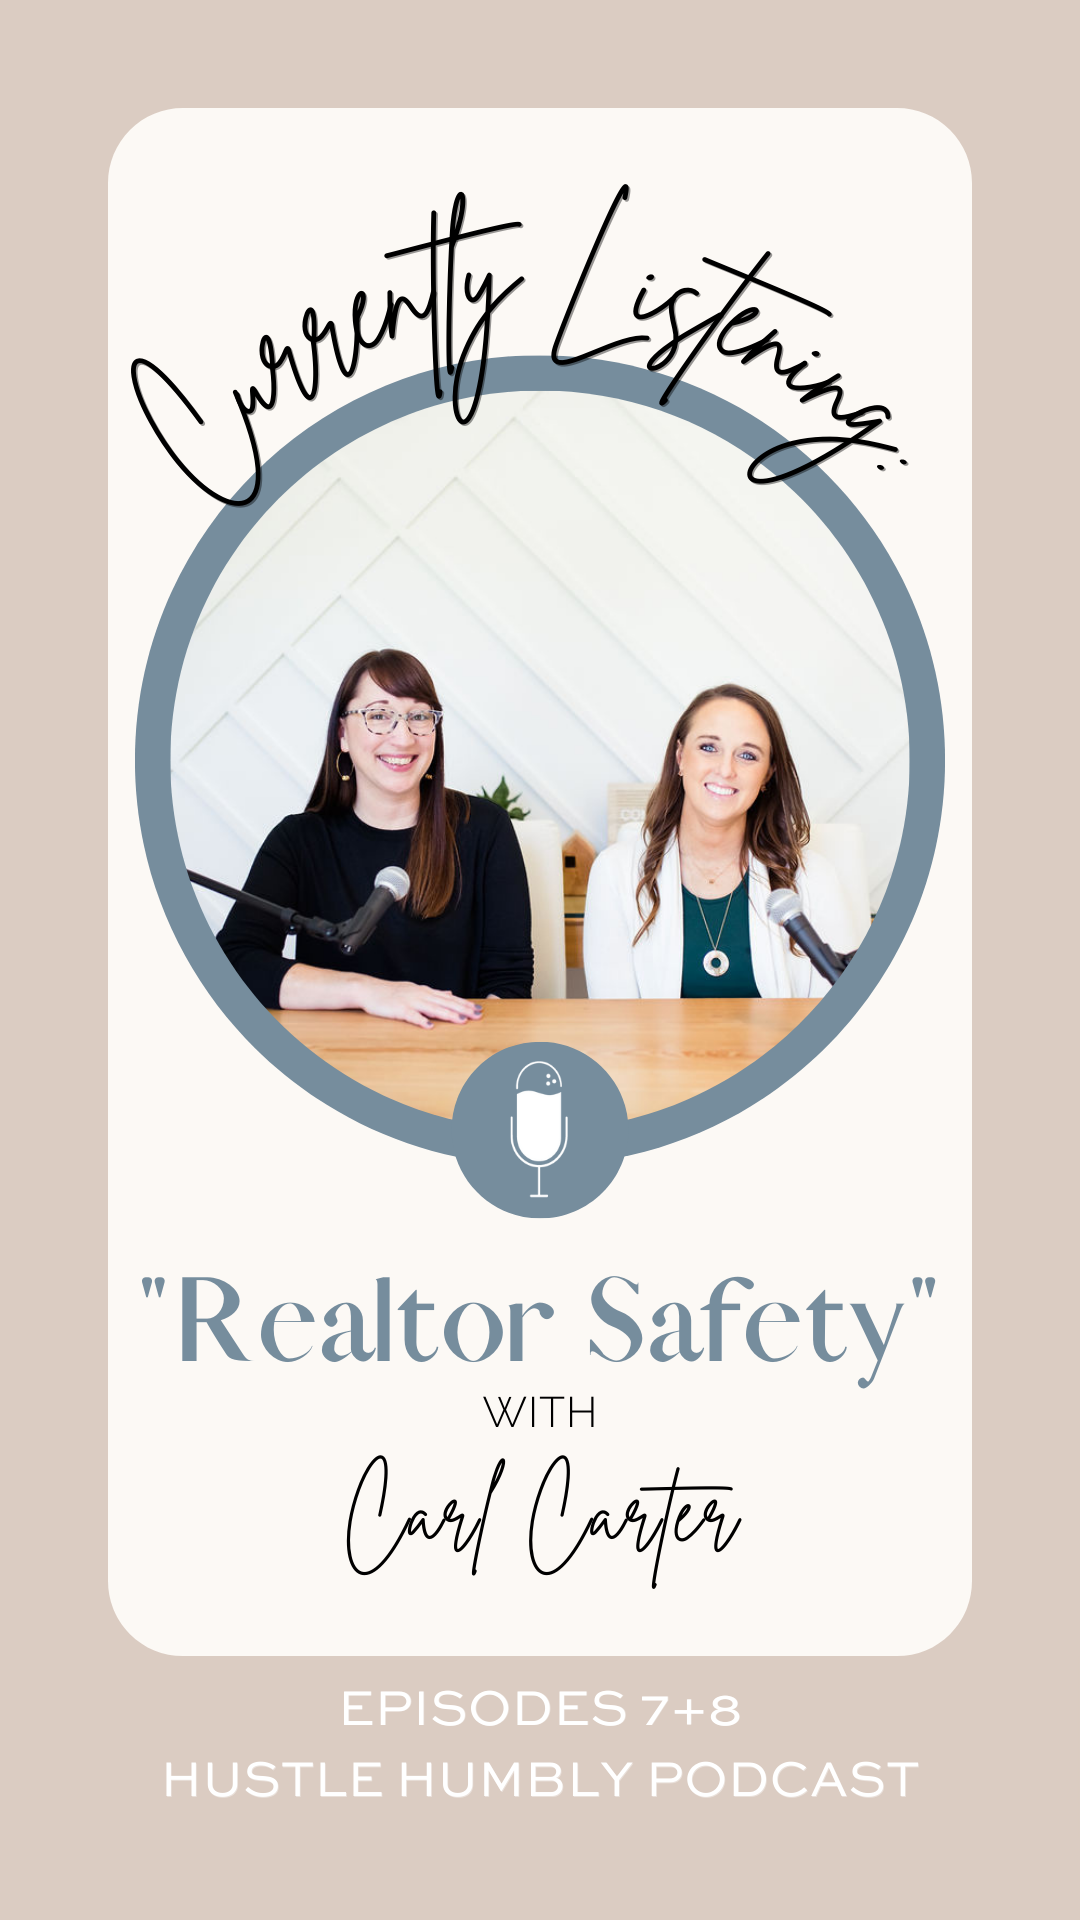 Carl Carter discussing realtor safety on Hustle Humbly Podcast 